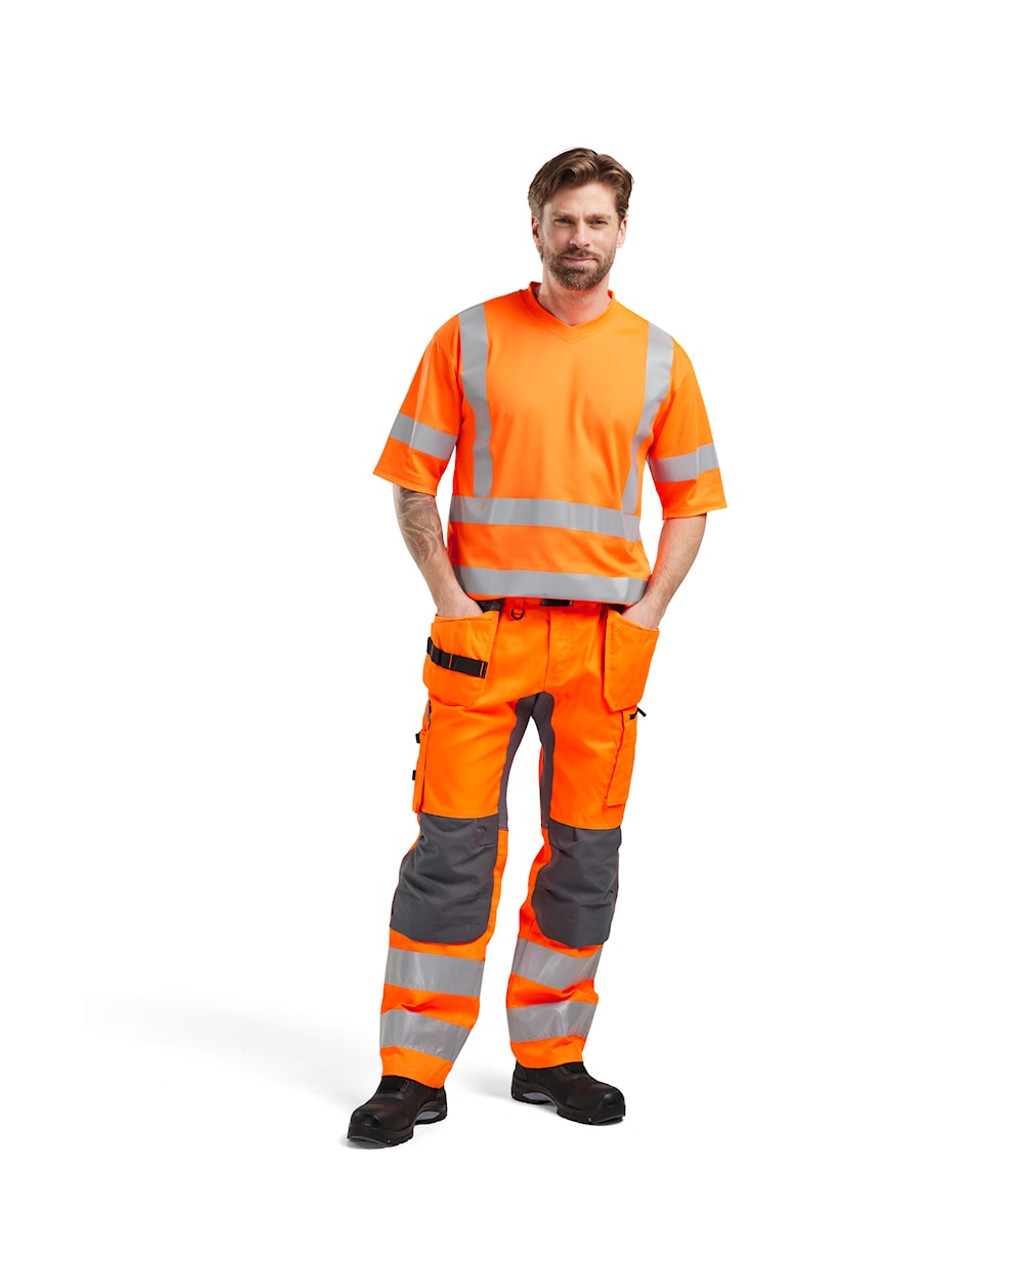 BLAKLADER T-Shirt  3380  with  for BLAKLADER T-Shirt  | 3380  High Vis Orange UV Protection Short Sleeve T-Shirt with Reflective Tape Durable Poly/Cotton Blend that have UV Protection  available in Australia and New Zealand